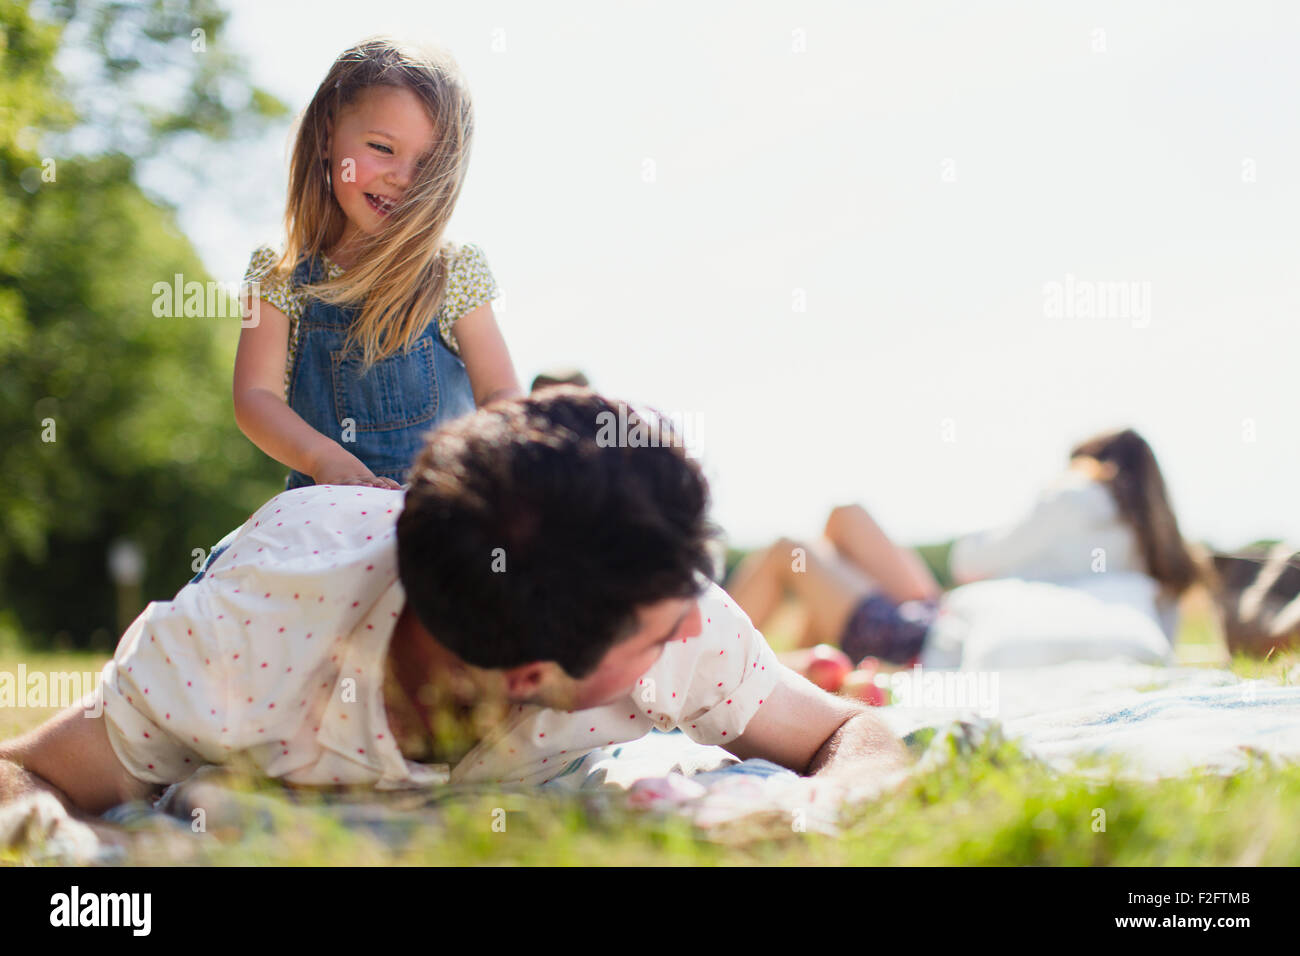 Playful daughter on top of father in sunny field Stock Photo